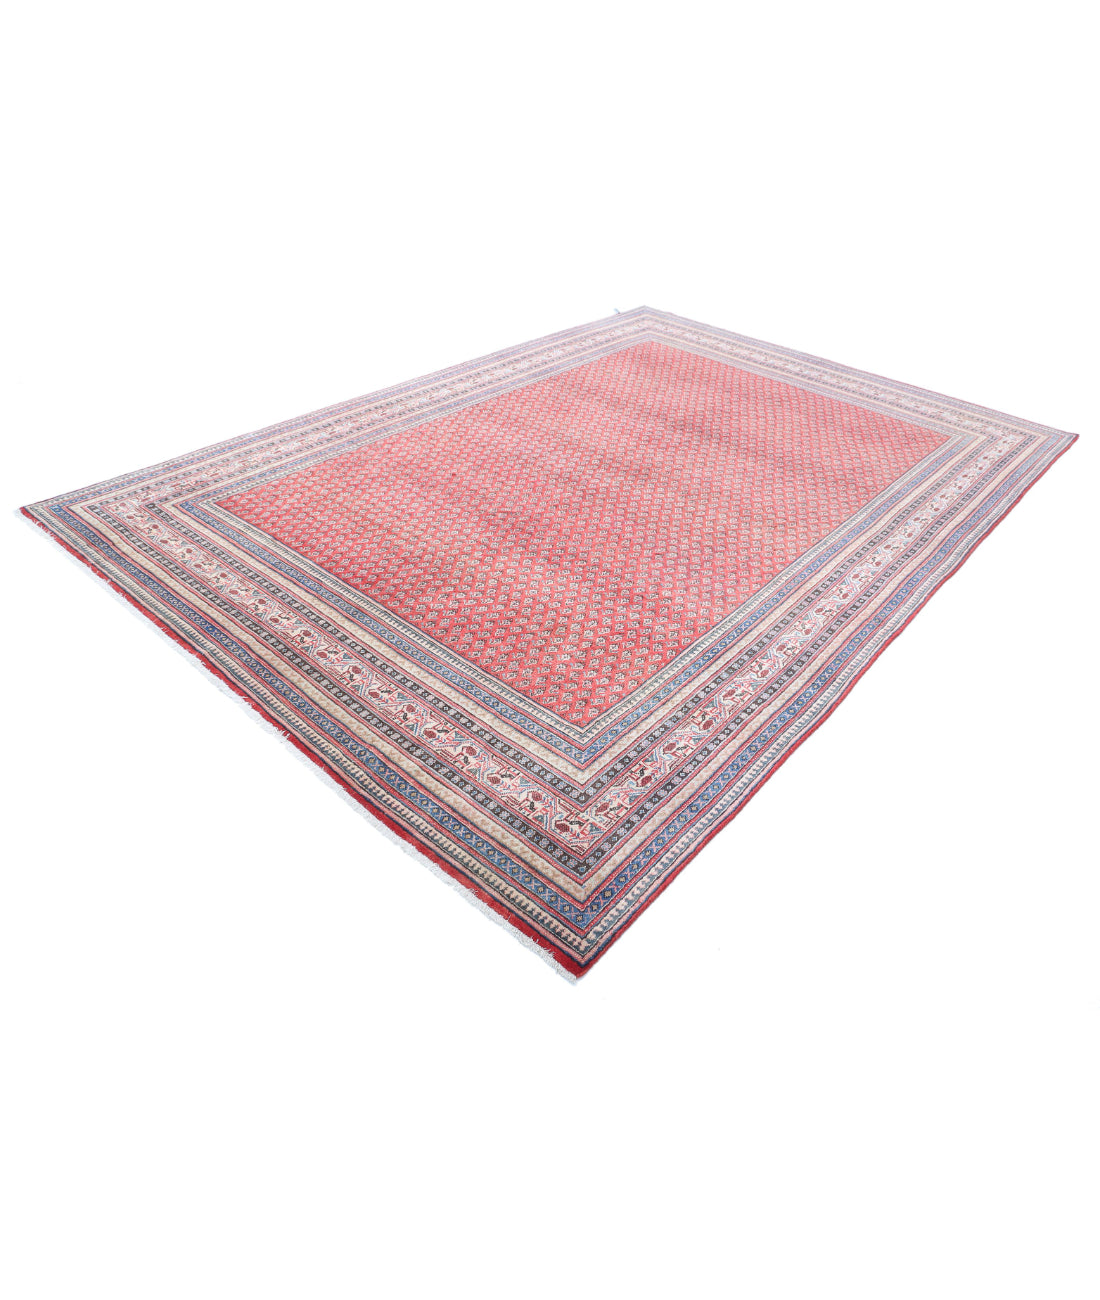 Hand Knotted Persian Mir Saraband Wool Rug - 7'8'' x 11'2'' 7'8'' x 11'2'' (230 X 335) / Red / Blue